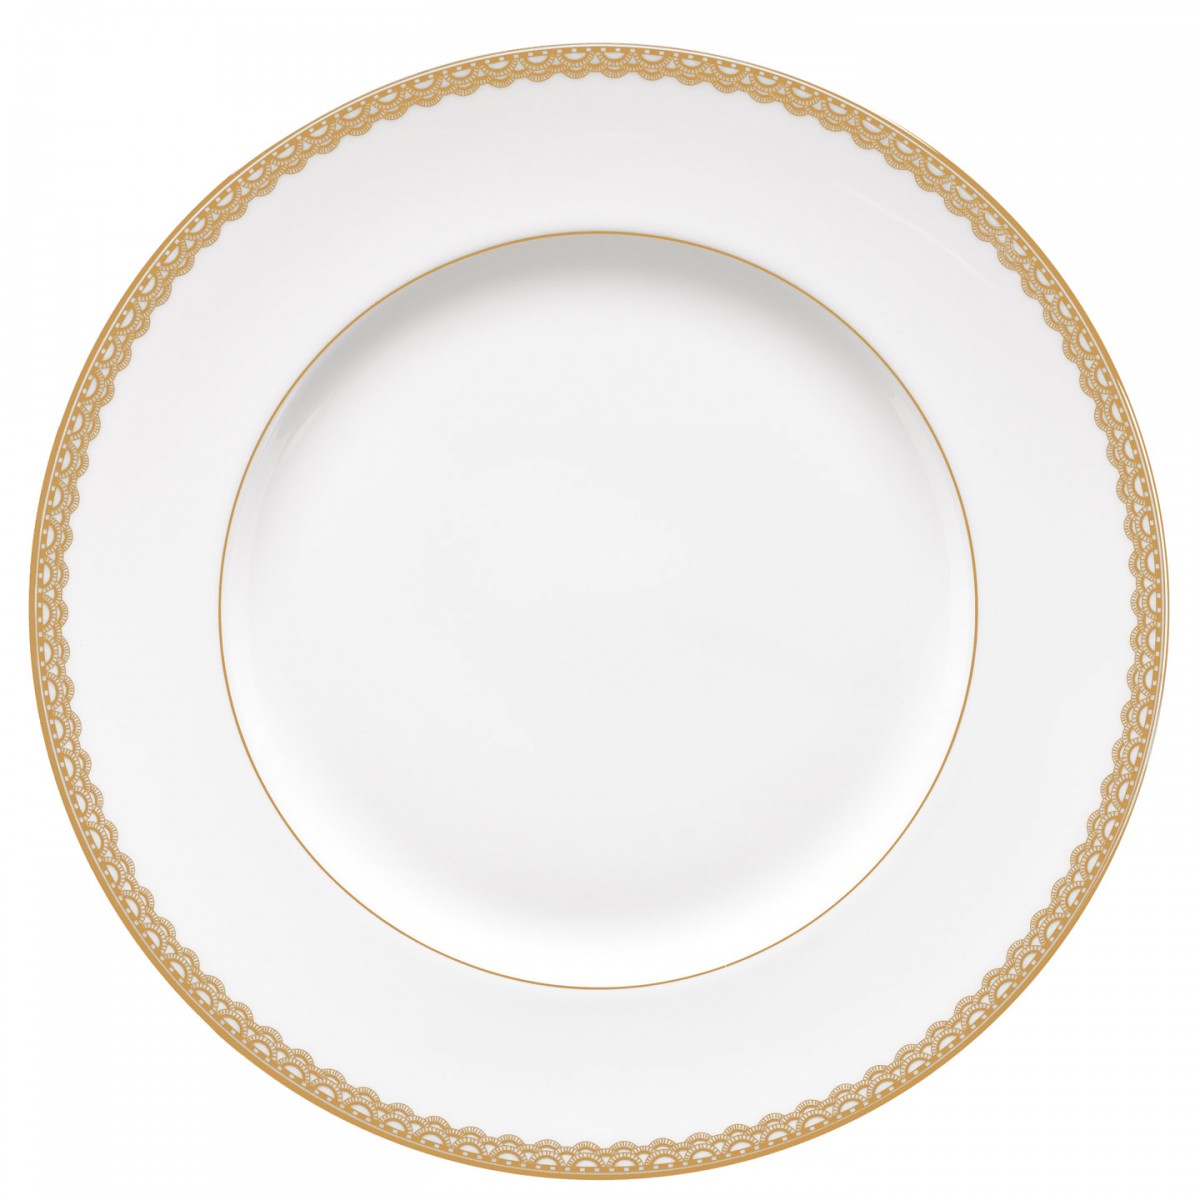 waterford-lismore-lace-gold-dinner-plate-10.5-in.jpg